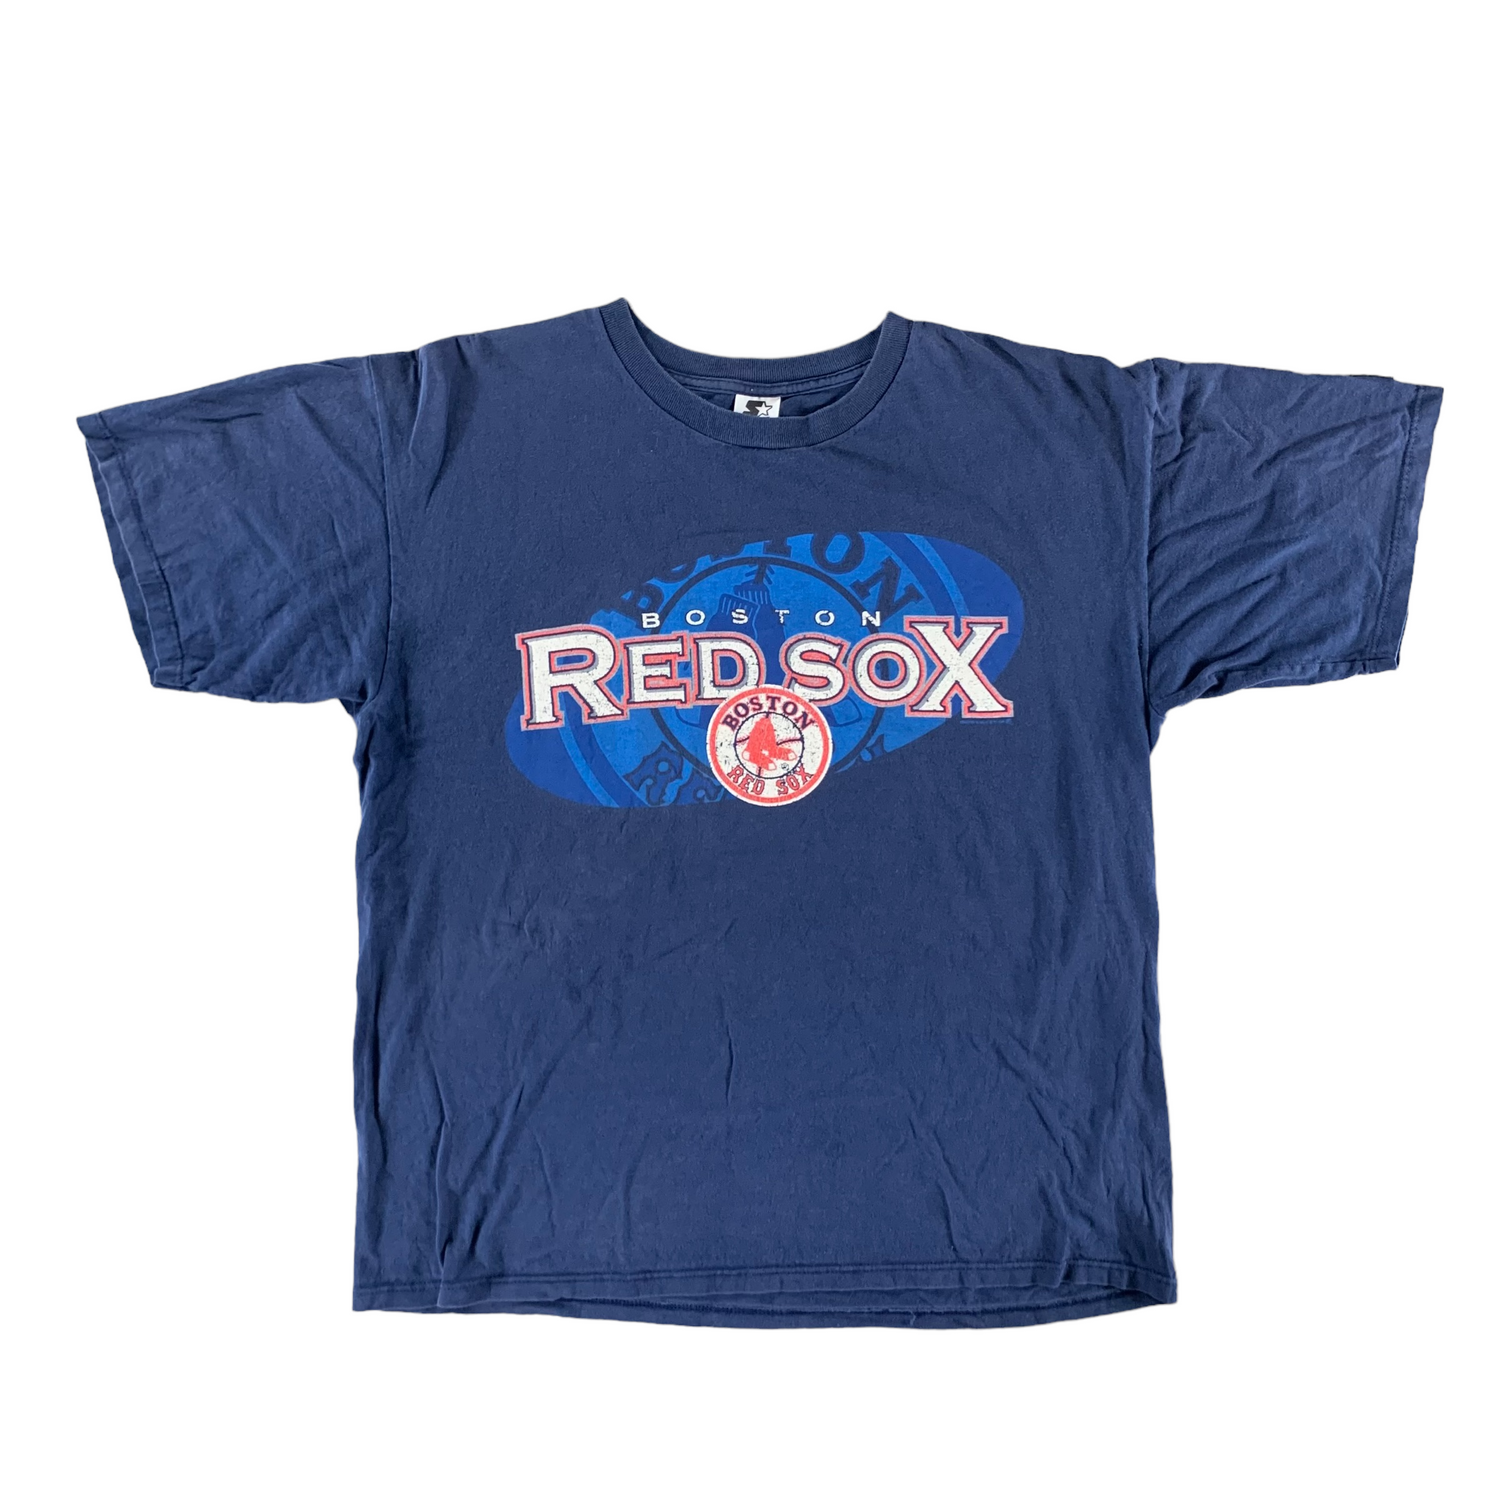 Vintage 1990s Boston Red Sox T-shirt size Large